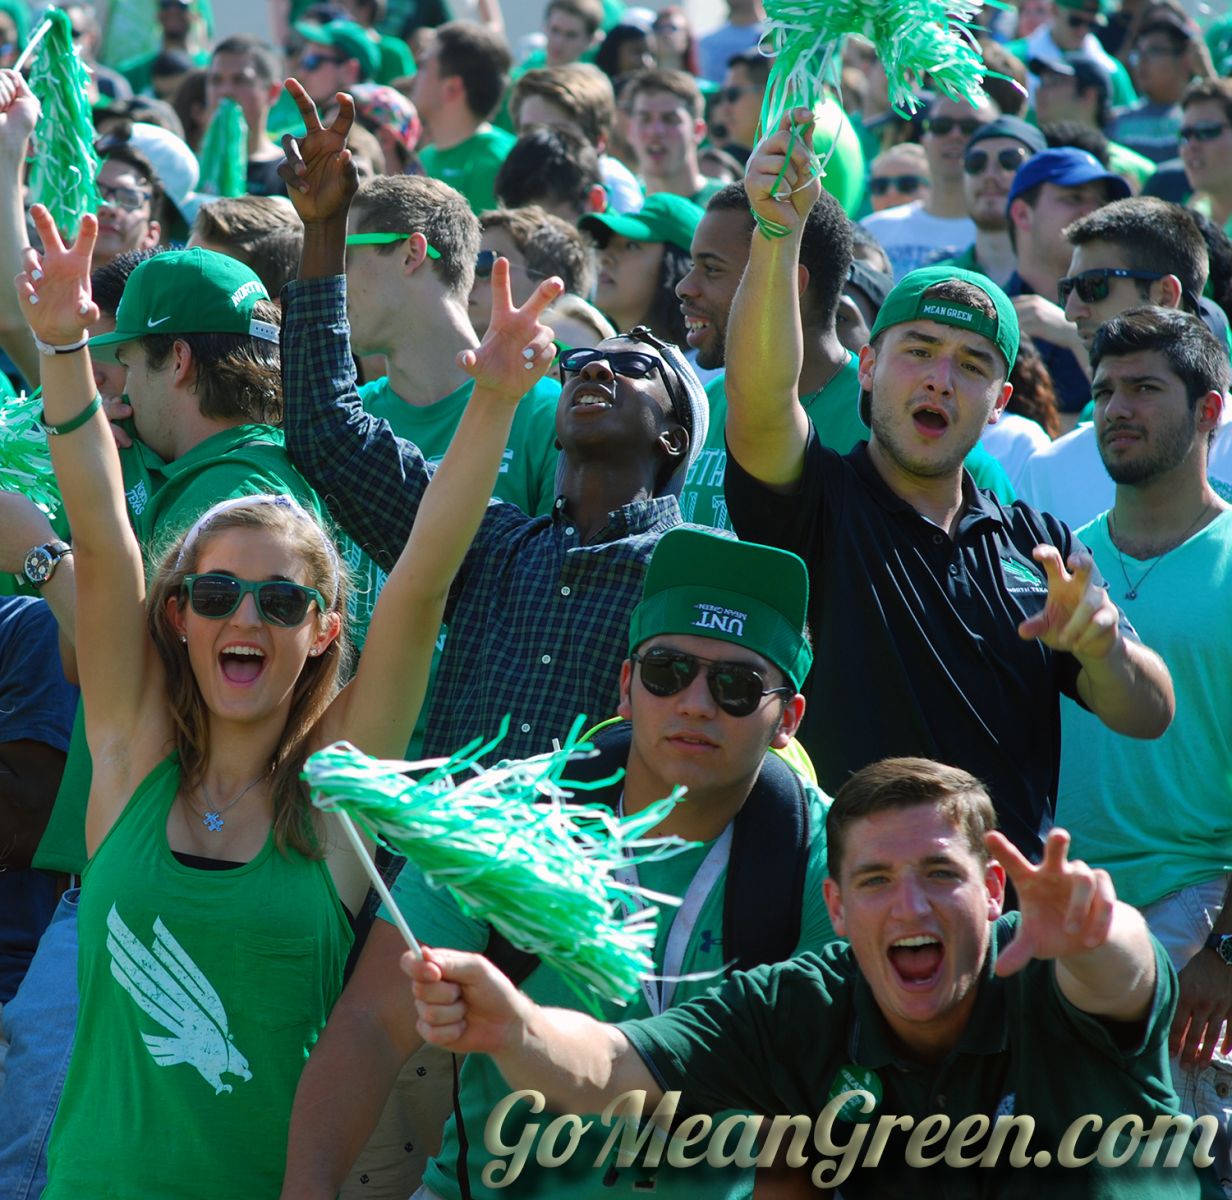 UNT Students At SMU game 2014